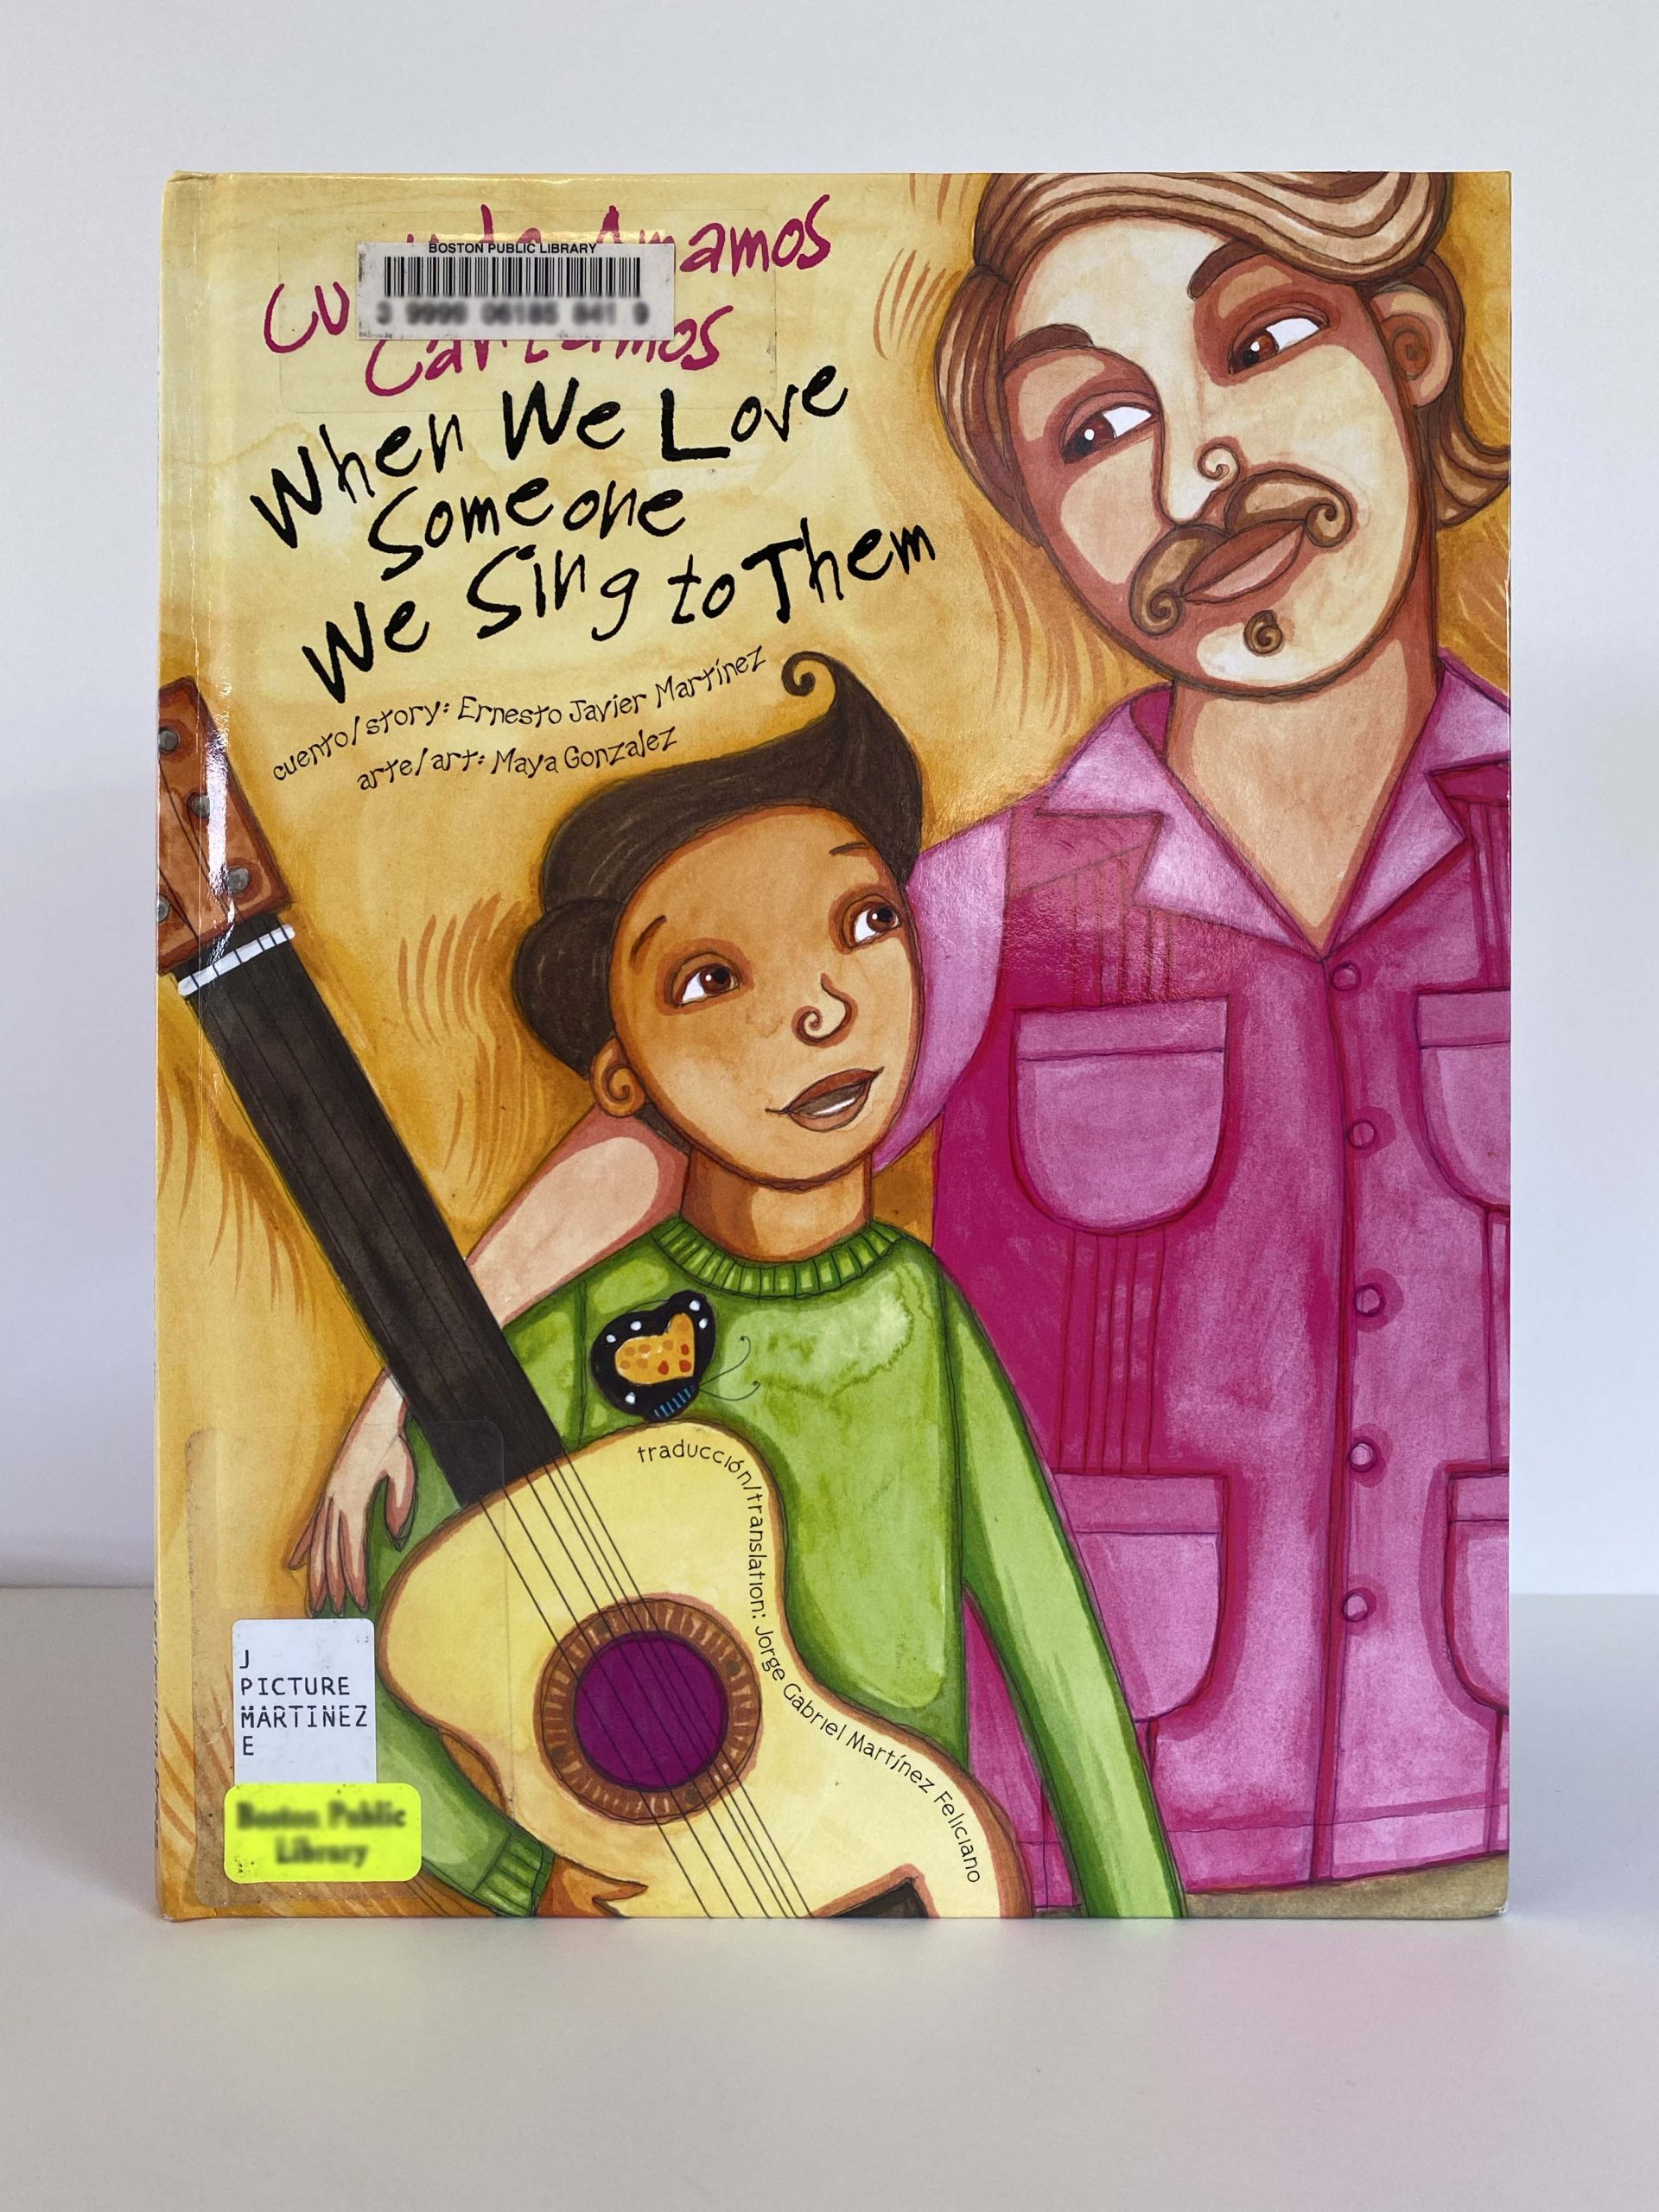 A book with the illustration of a child holding a guitar.